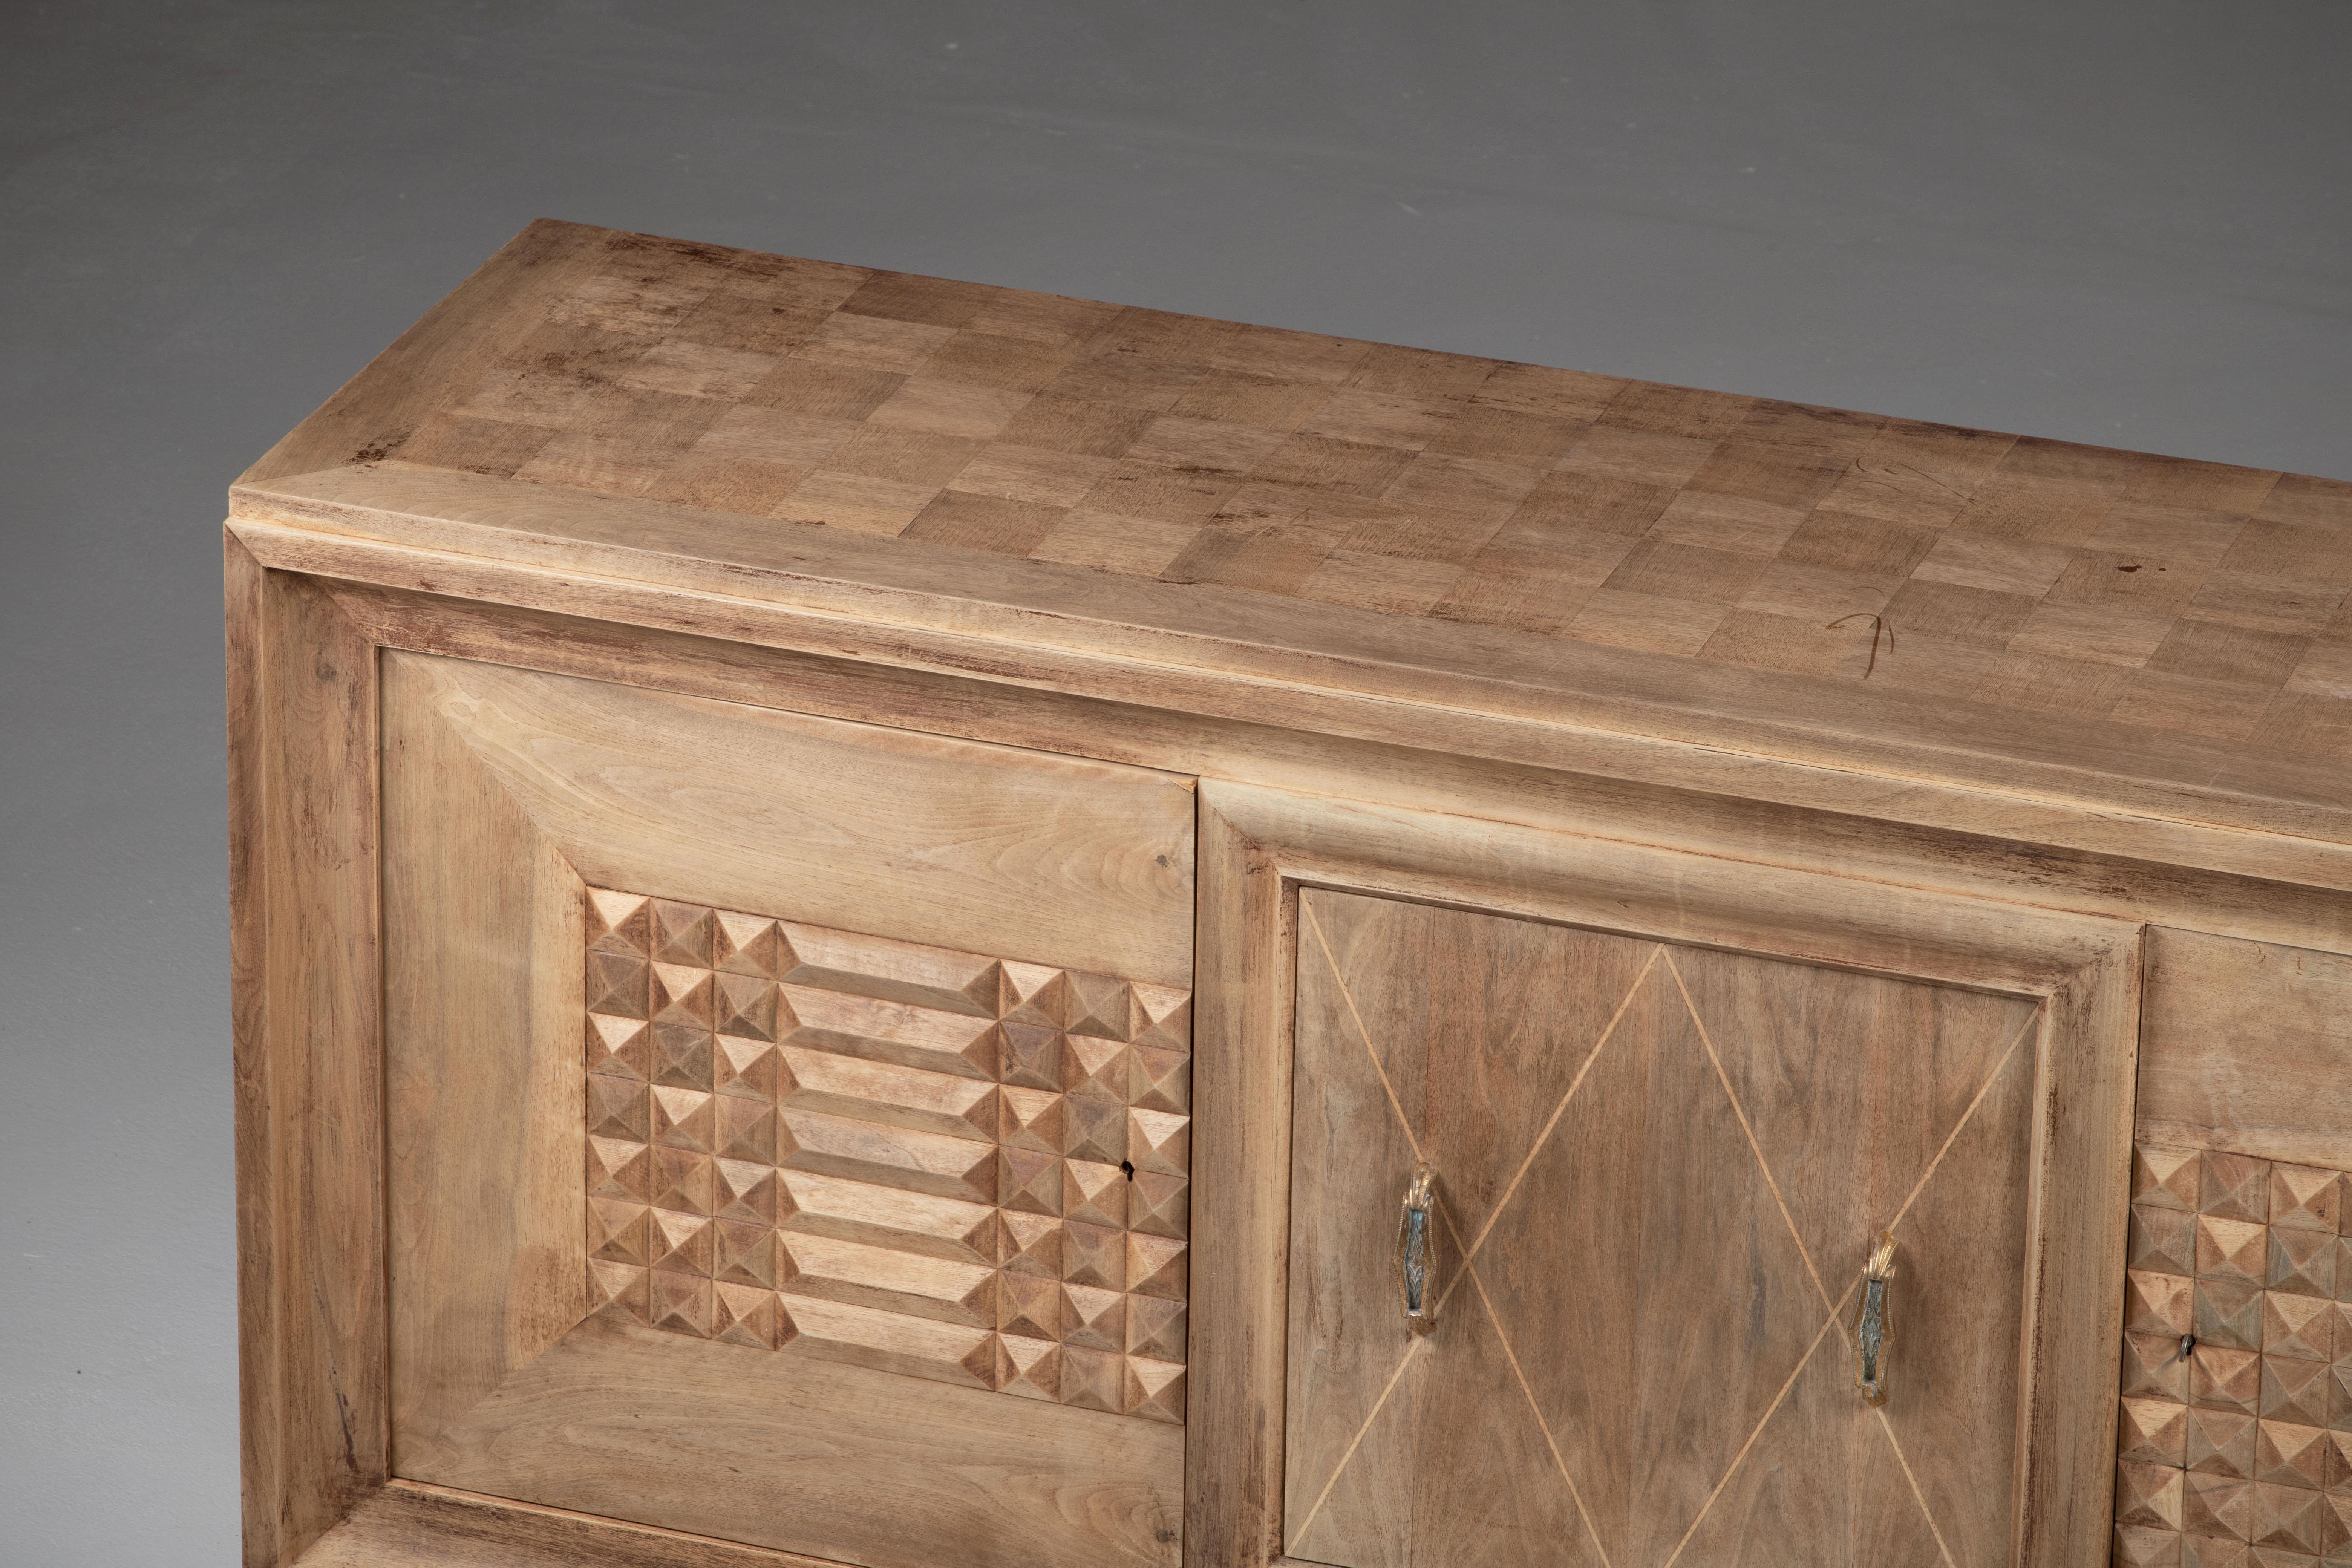 Bleached Art Deco Solid Oak Sideboard with Geometric Details, France, 1940s For Sale 11